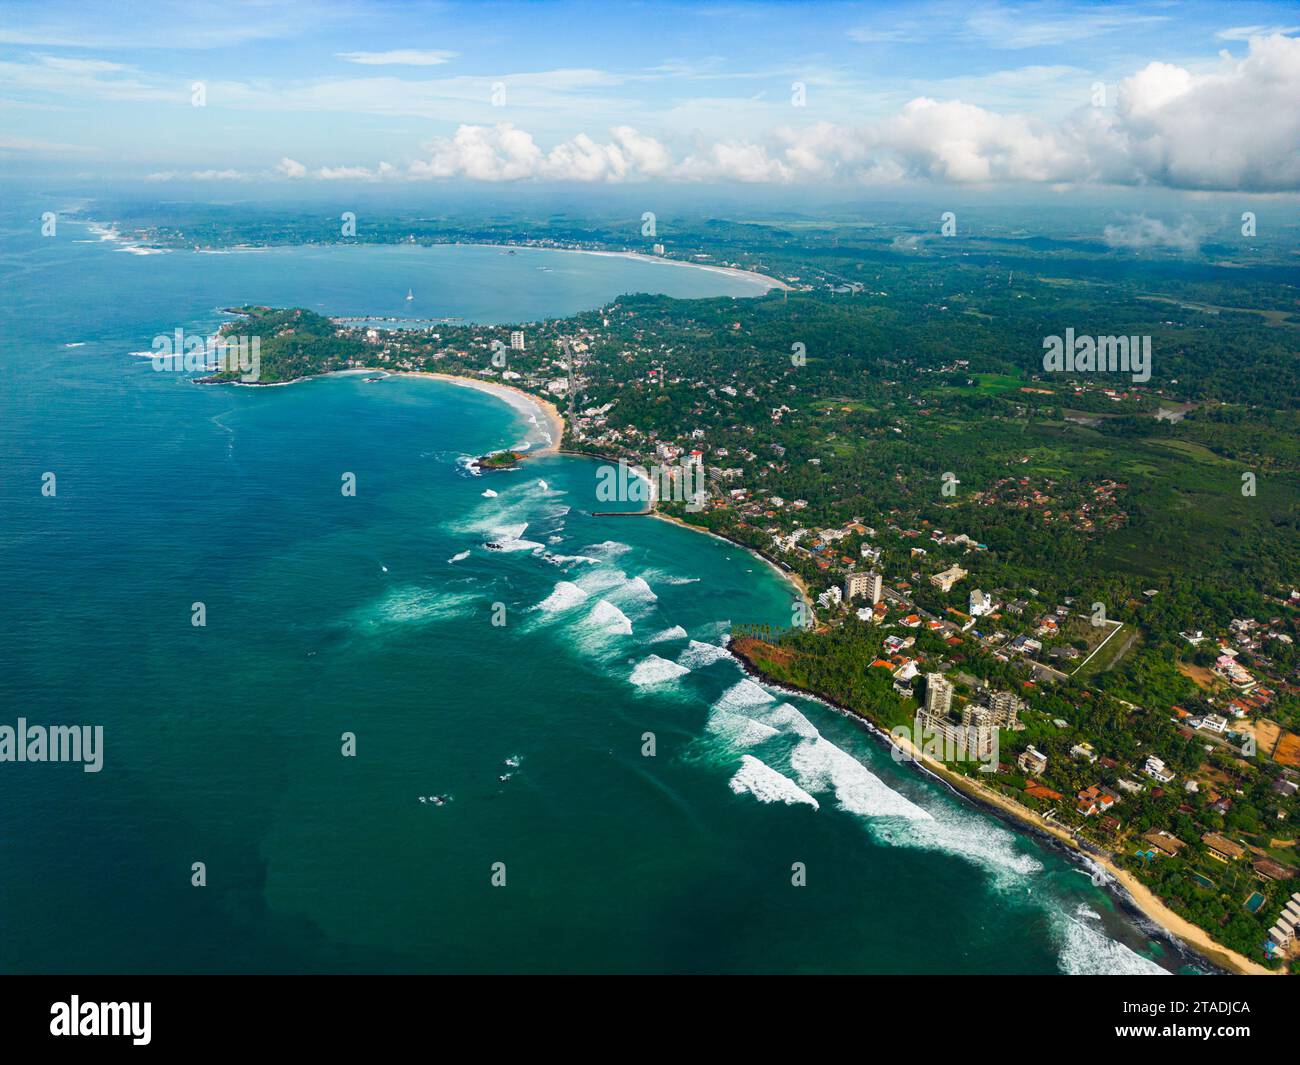 Aerial view with panoramic coastline with sparkling turquoise waters against a lush green landscape, showcasing scenic coastal living and the junction Stock Photo